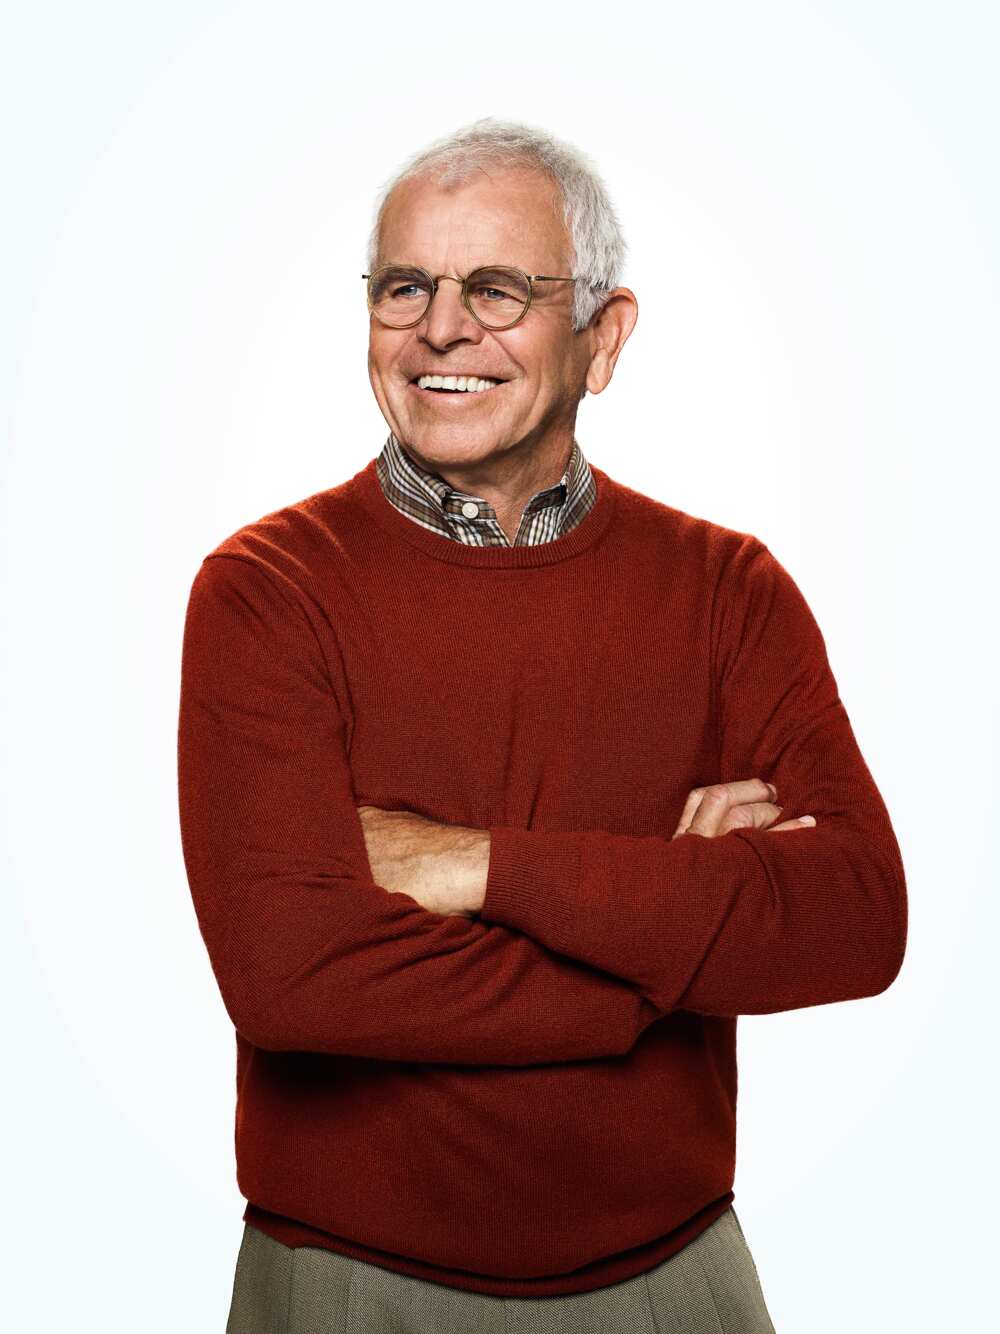 What TV shows did William Devane play on?